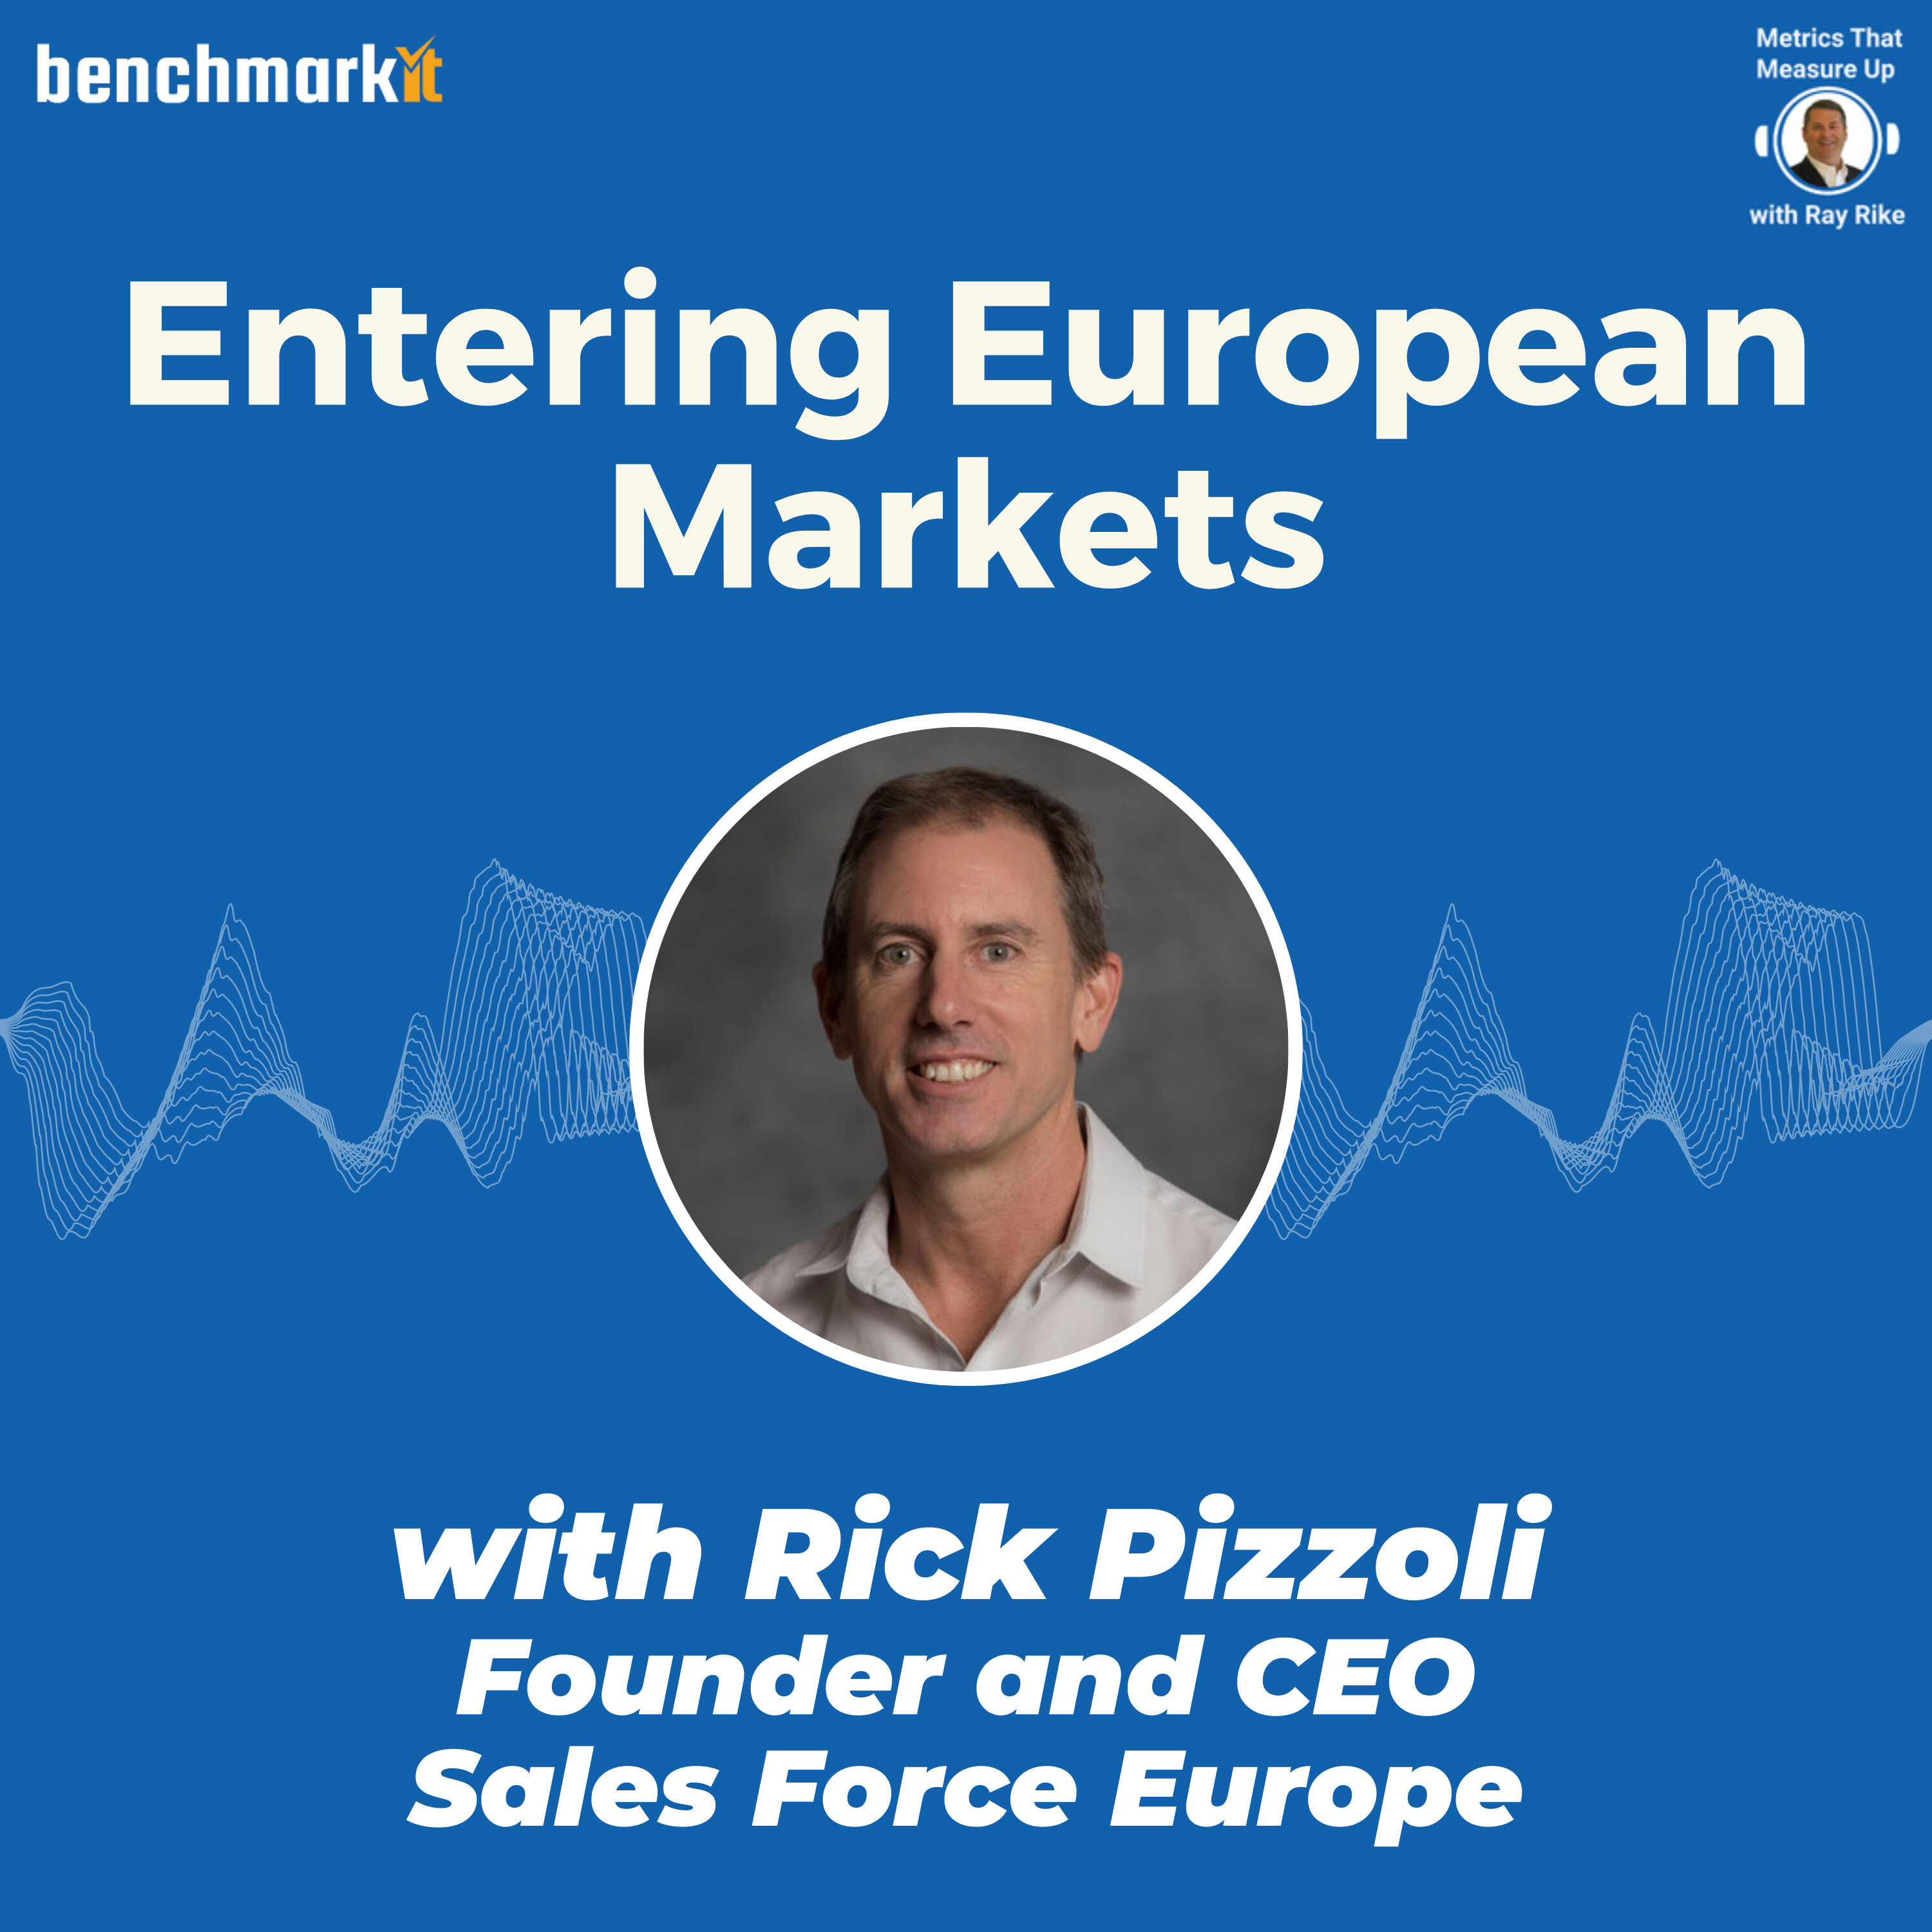 SaaS Expansion across Europe - with Rick Pizzoli, Sales Force Europe